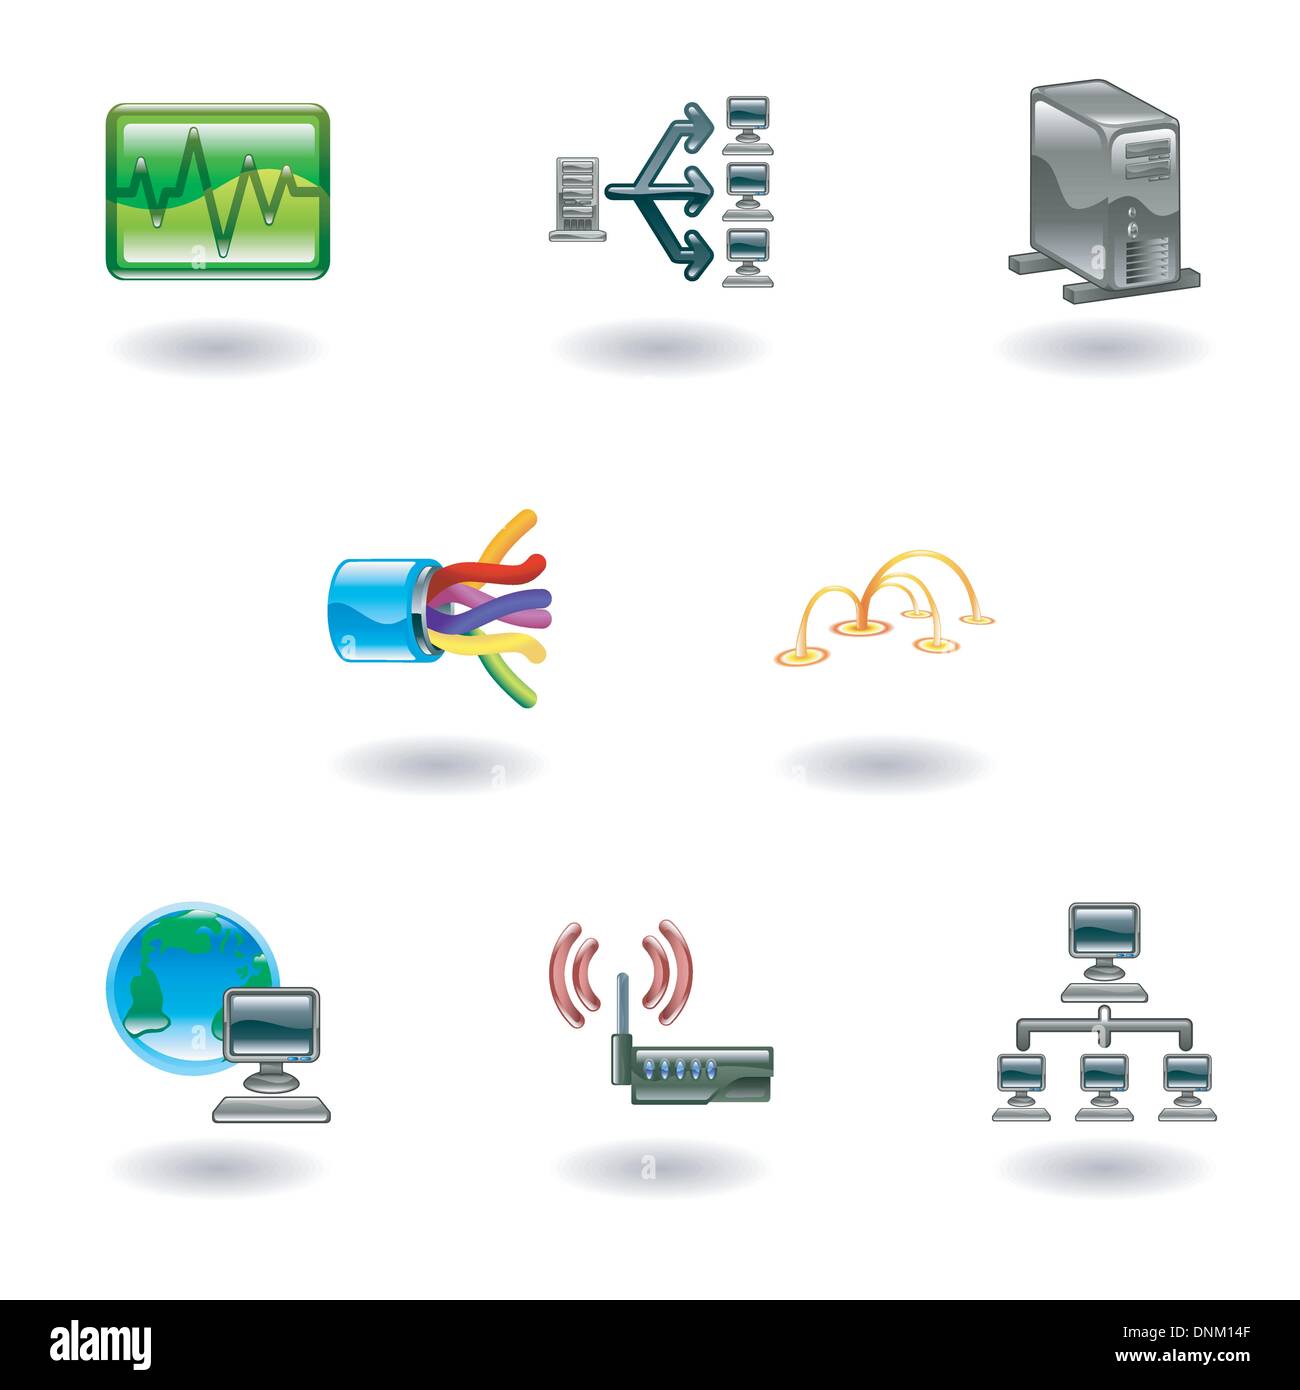 A glossy computer network and internet icon set Stock Vector